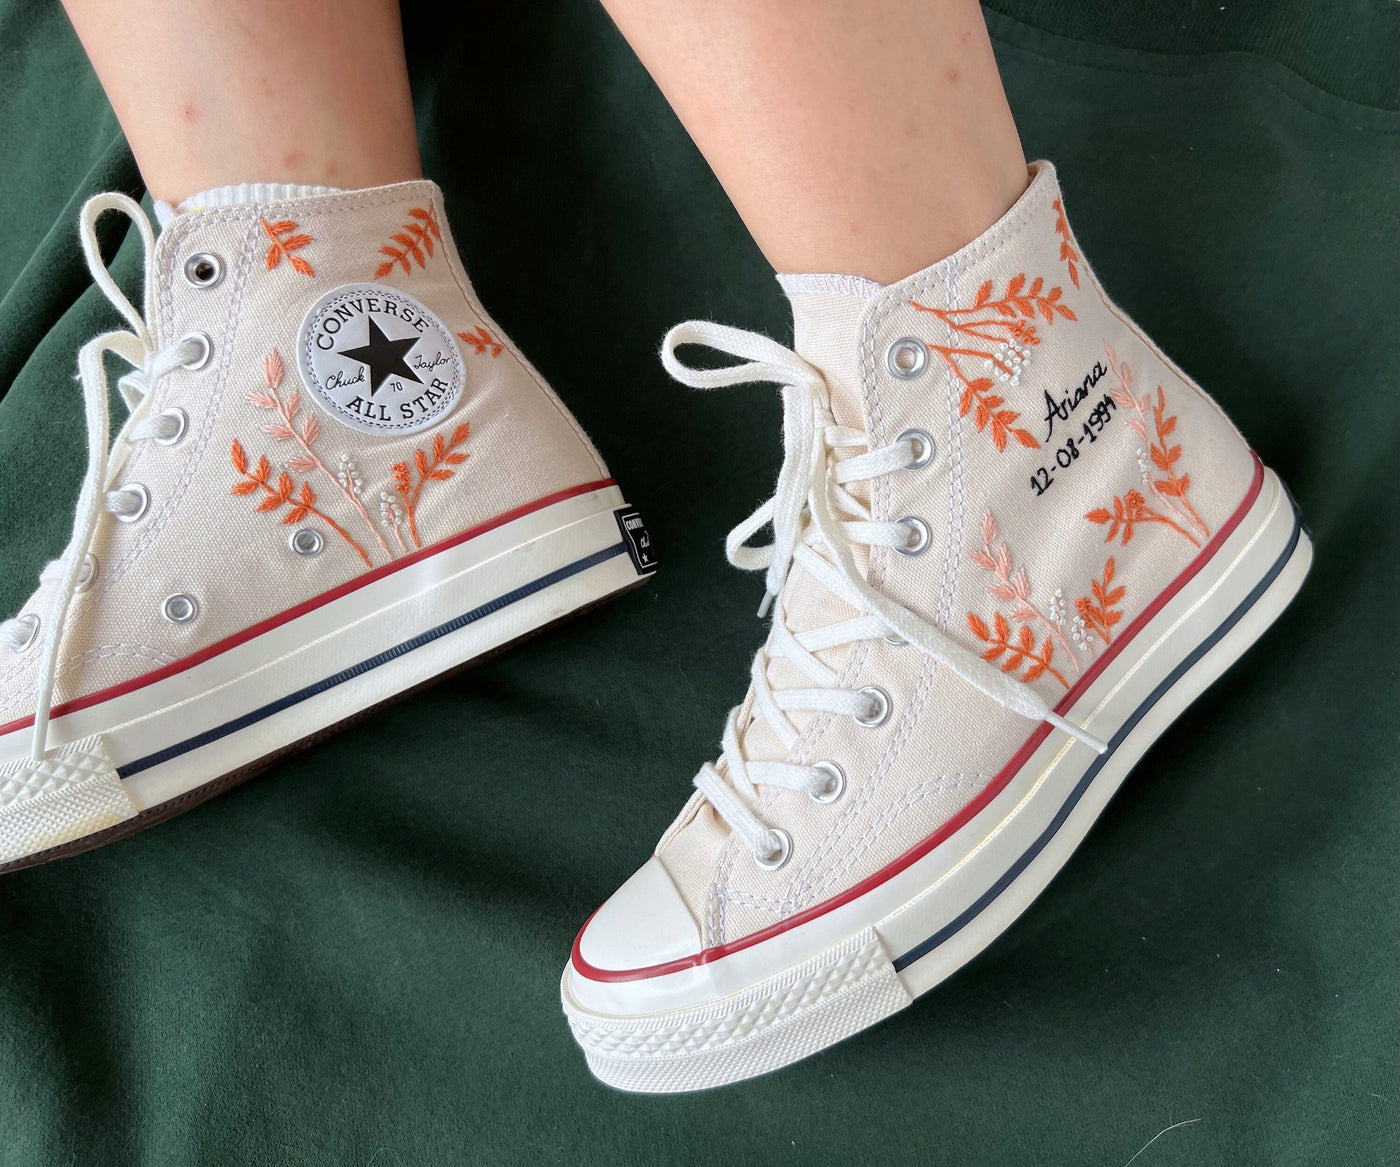 Embroidered Converse,Converse Orange Tree Leaves Cover The Wedding Day